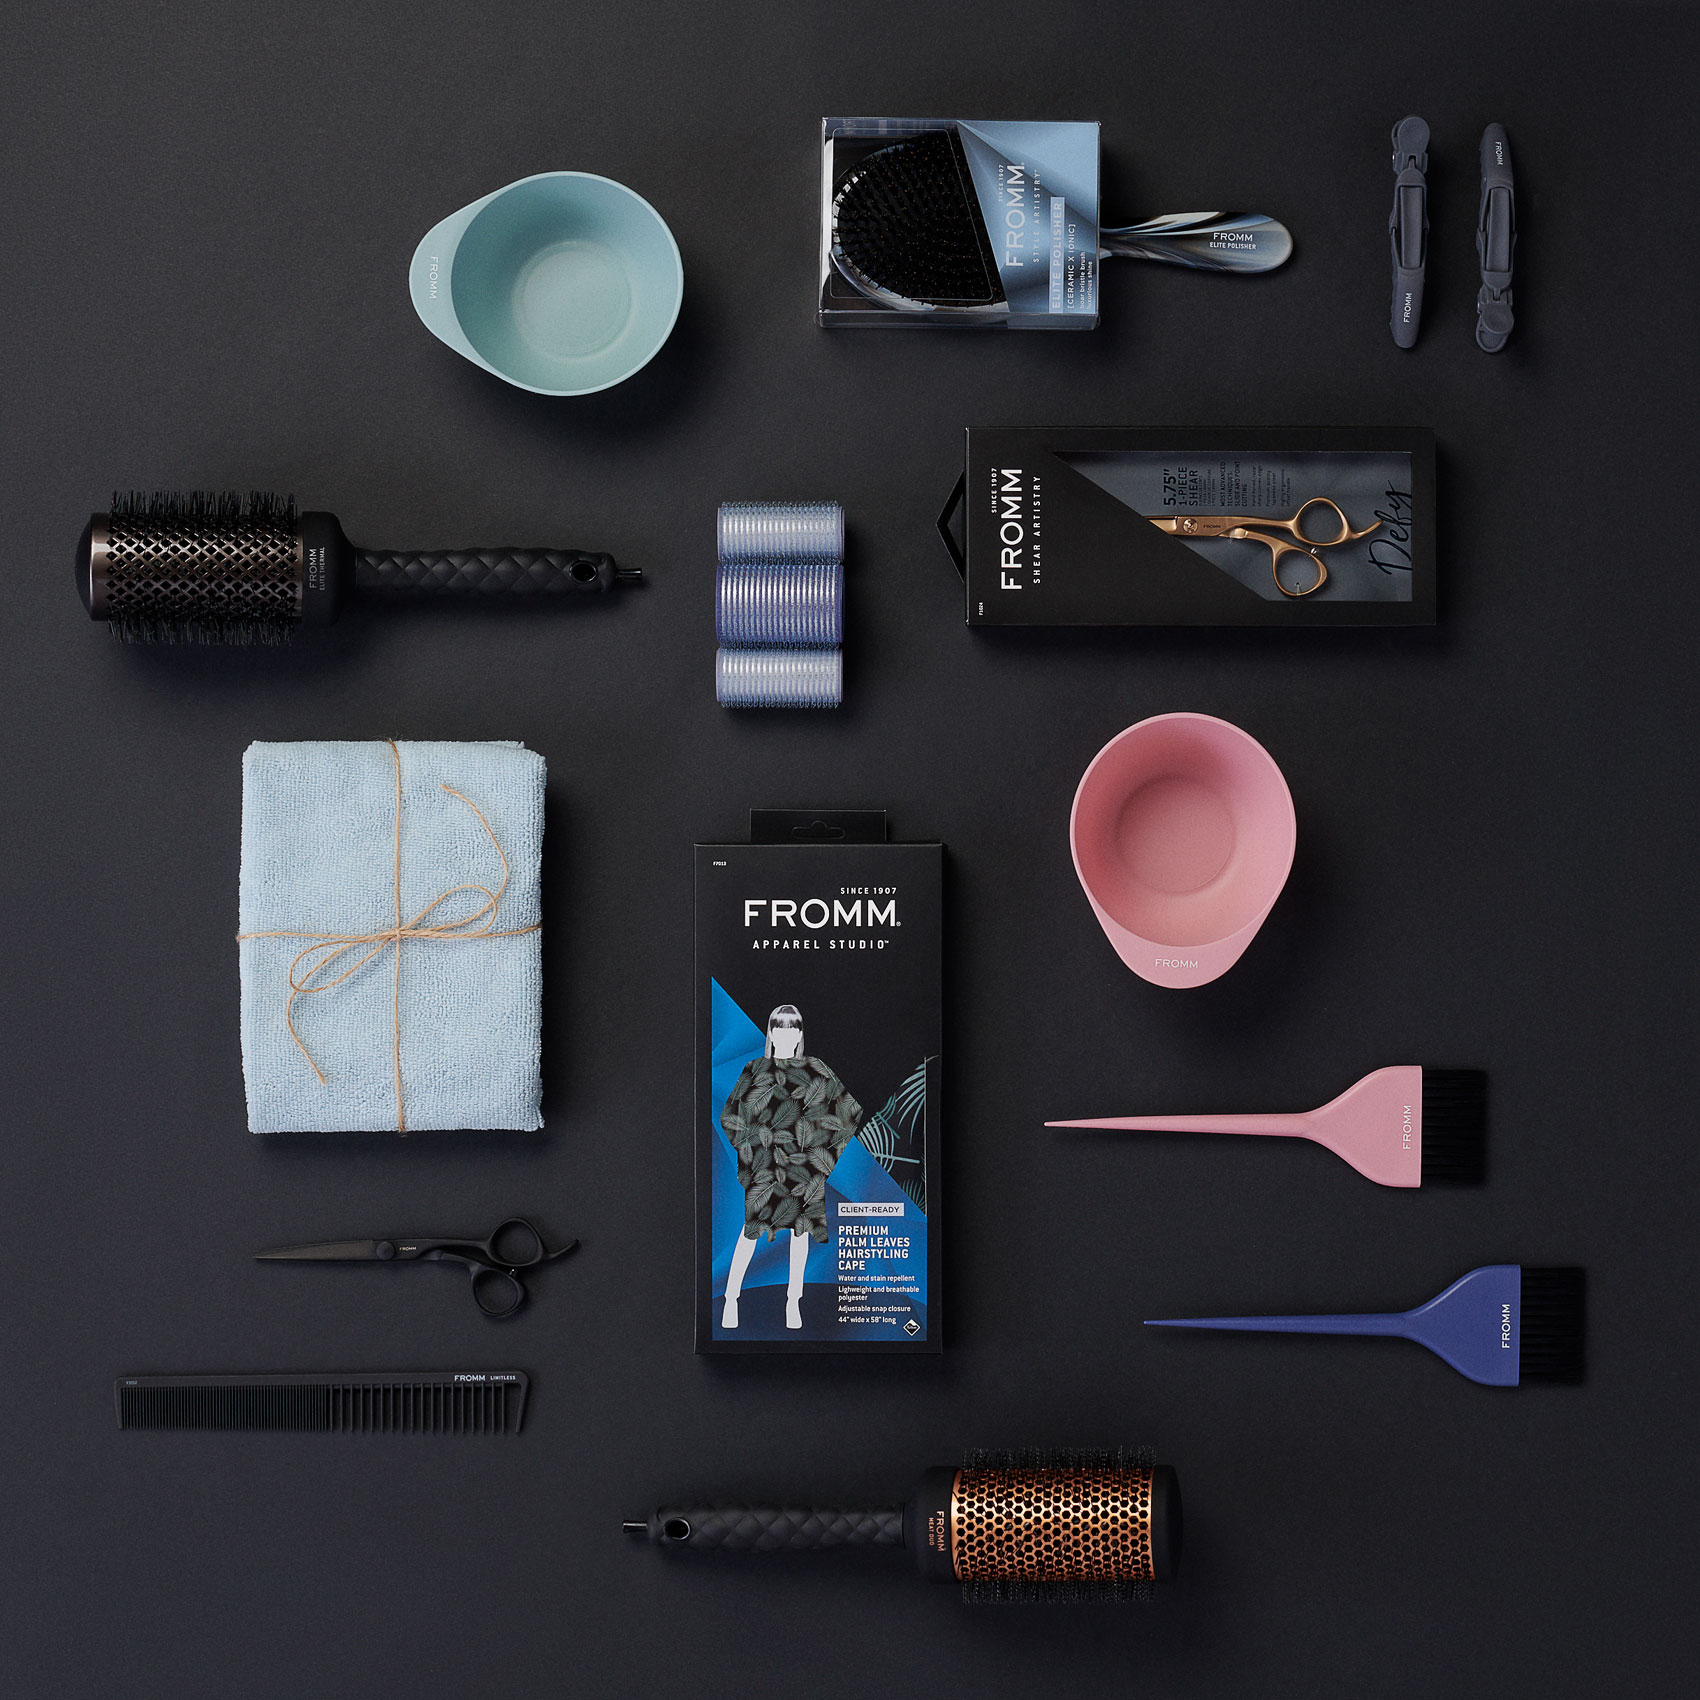 Hair styling tools organized neatly as flat-lay on black surface